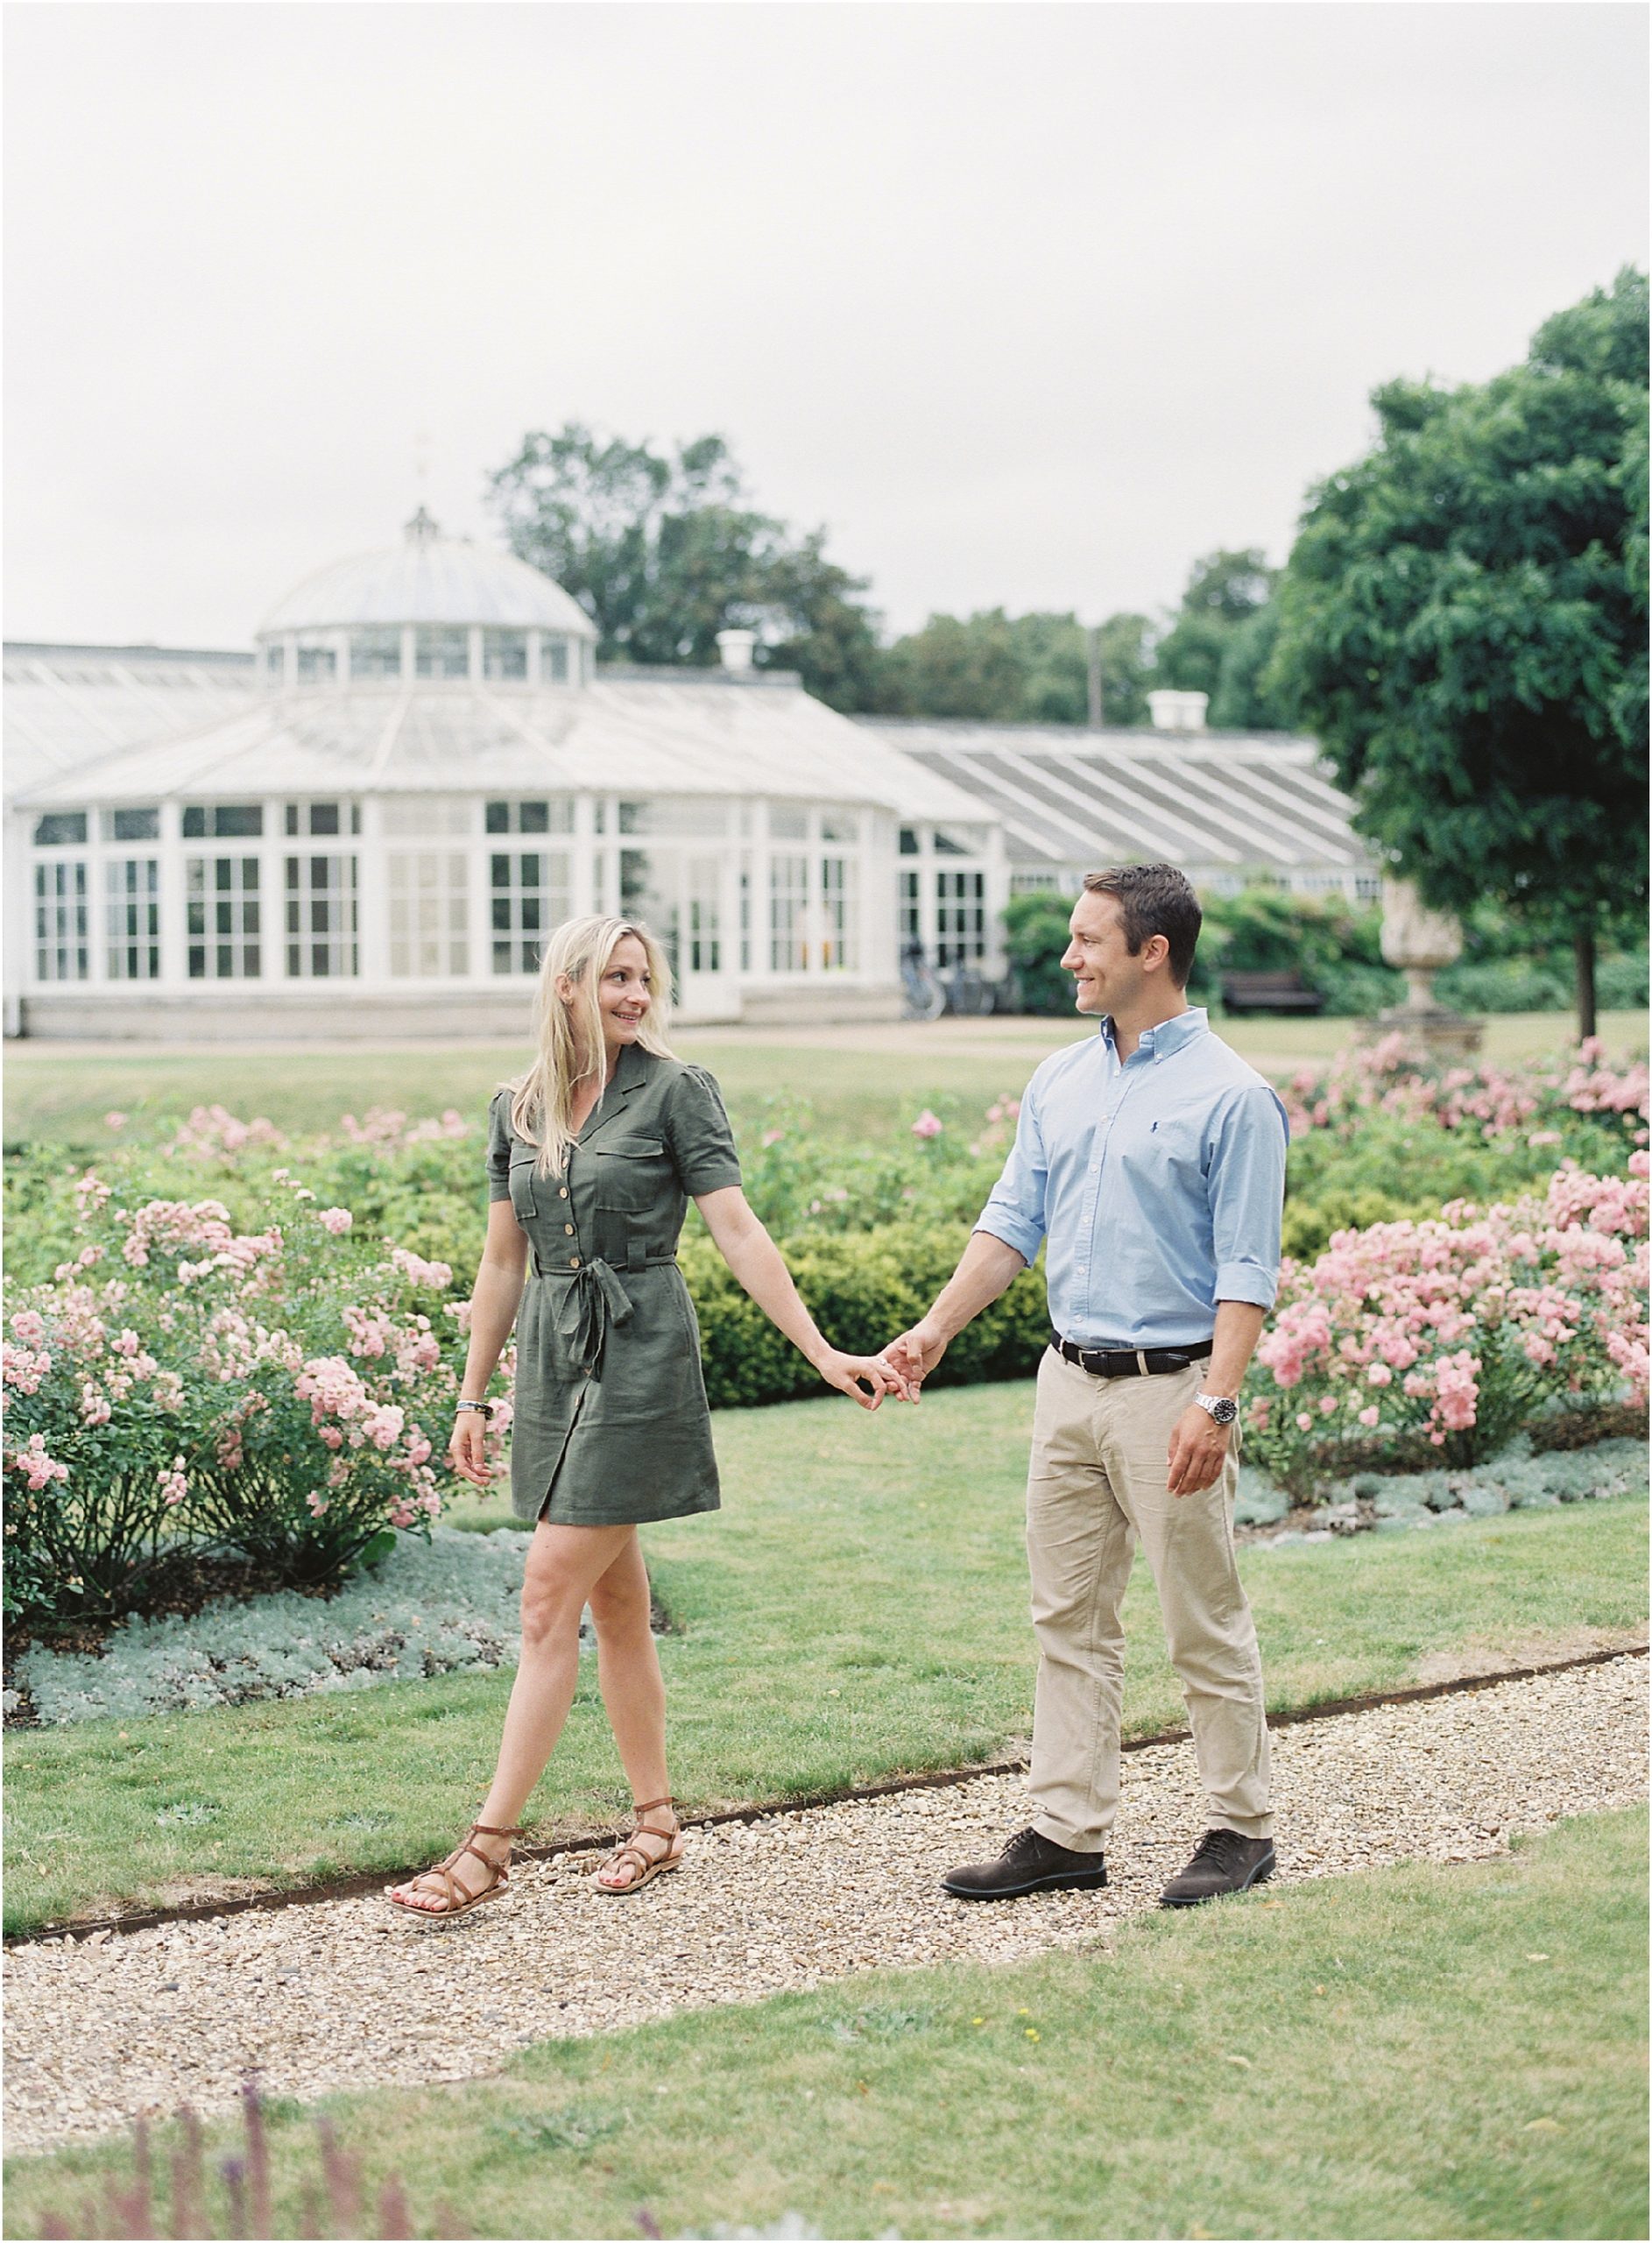 Newly engaged couple walking hand in hand in rose garden